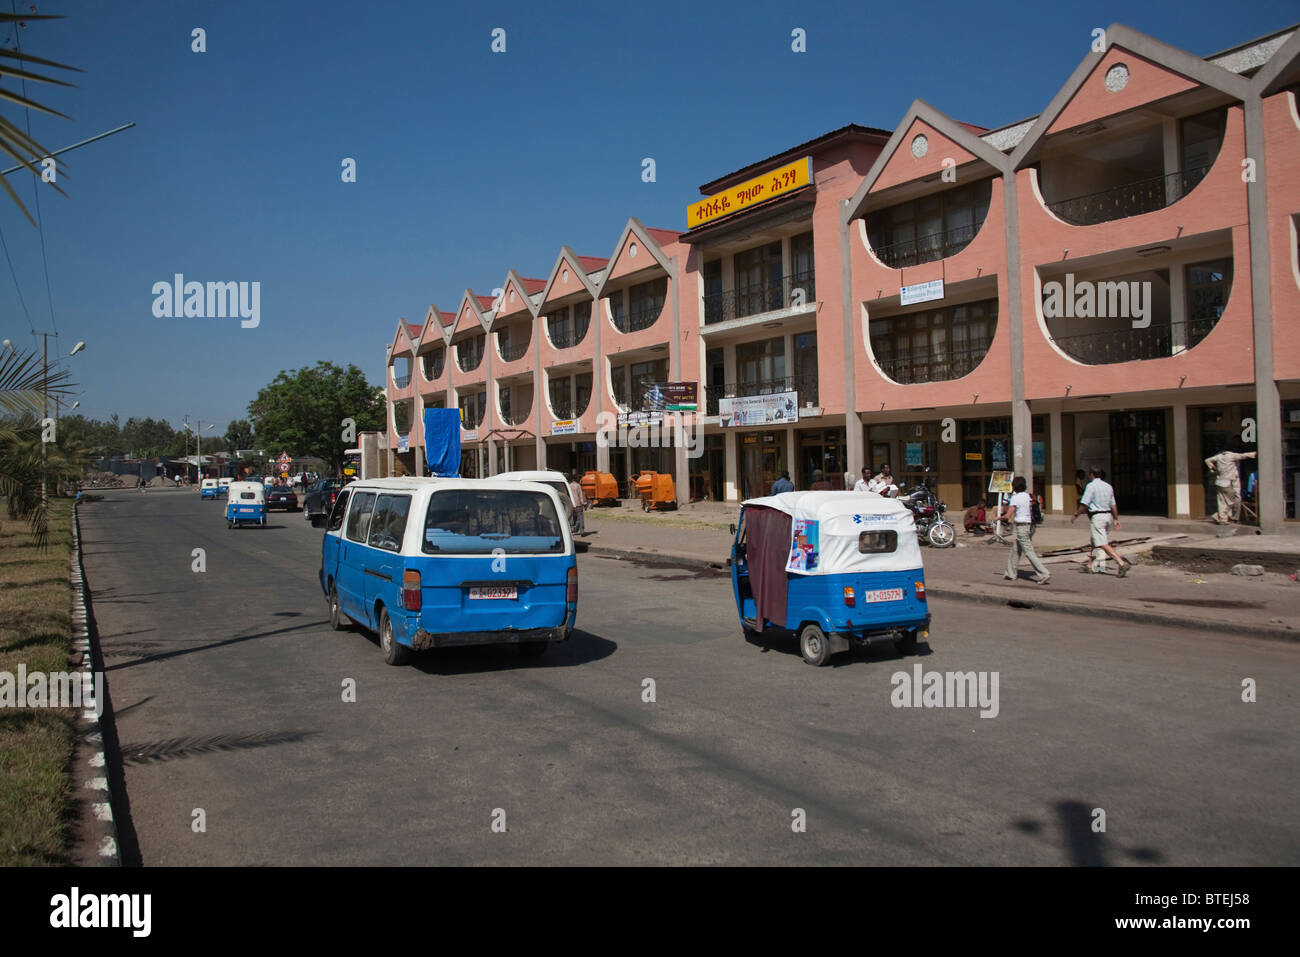 Downtown Awassa with blue taxis and bajaj vehicles Stock Photo